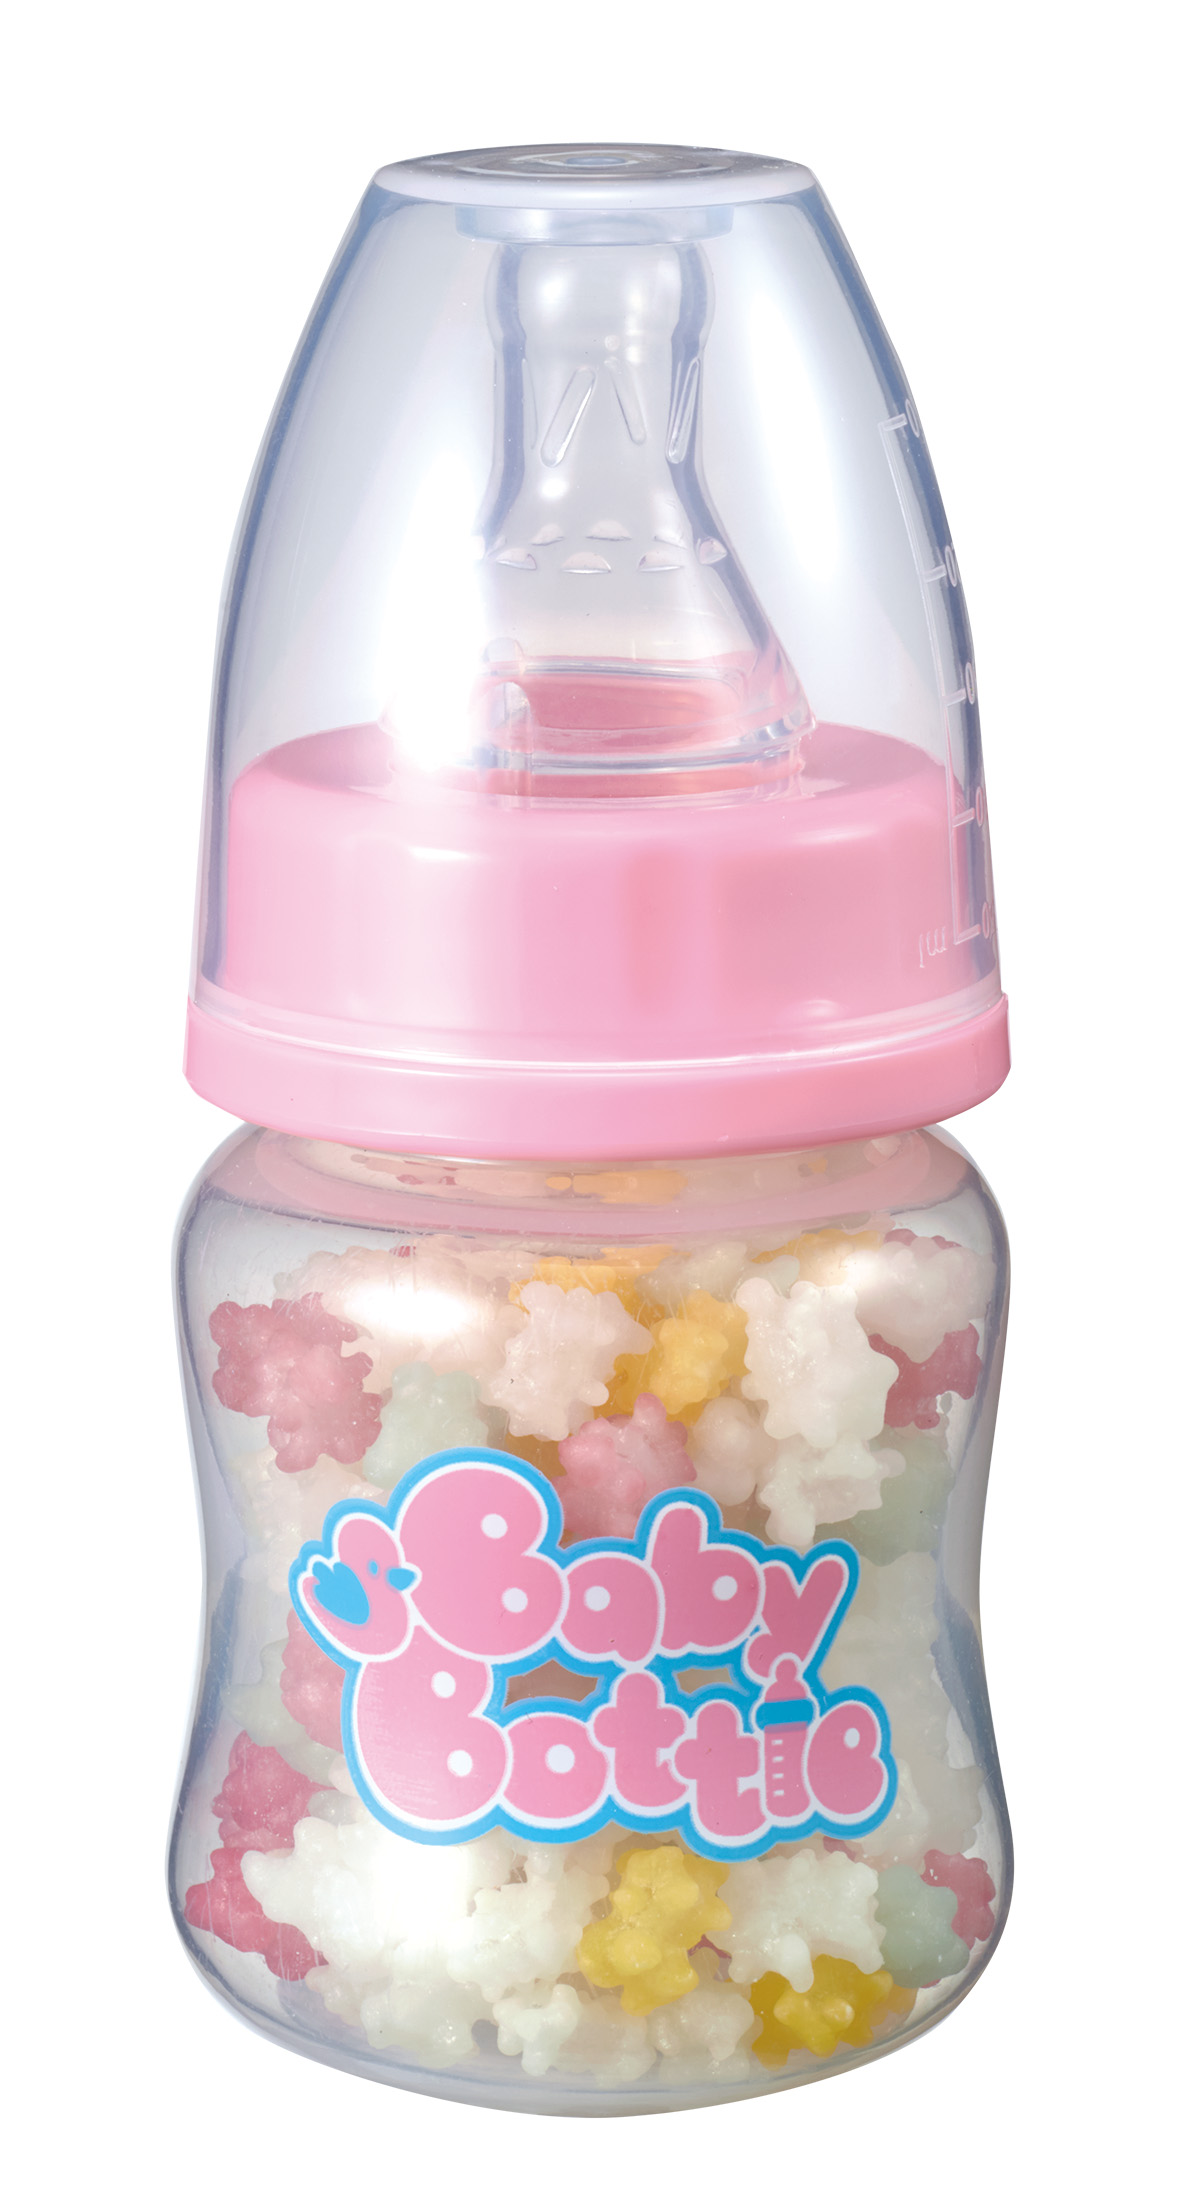 Toy x Candy Combi - Baby bottle Candy